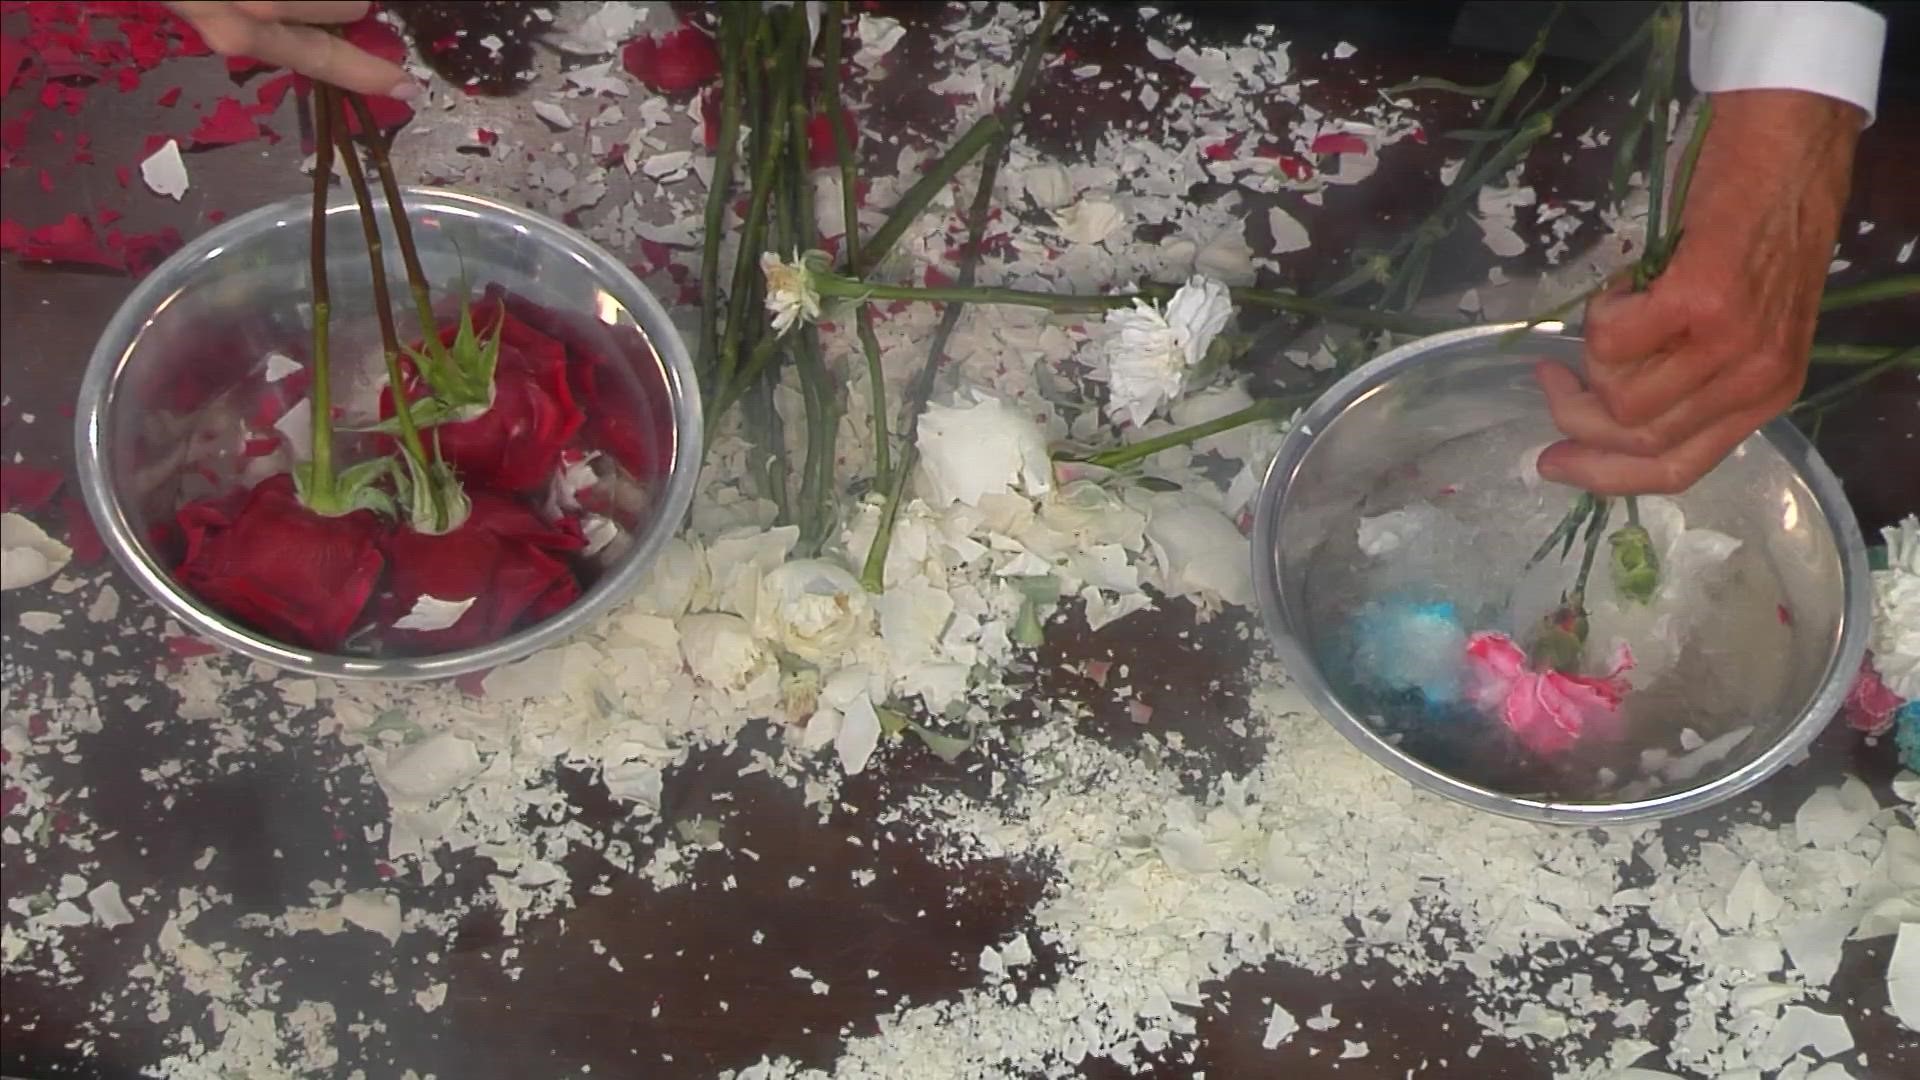 Now that Valentine's Day is over, you might be wondering what to do with those flowers you got. Science guy Steve Spangler has some ideas.